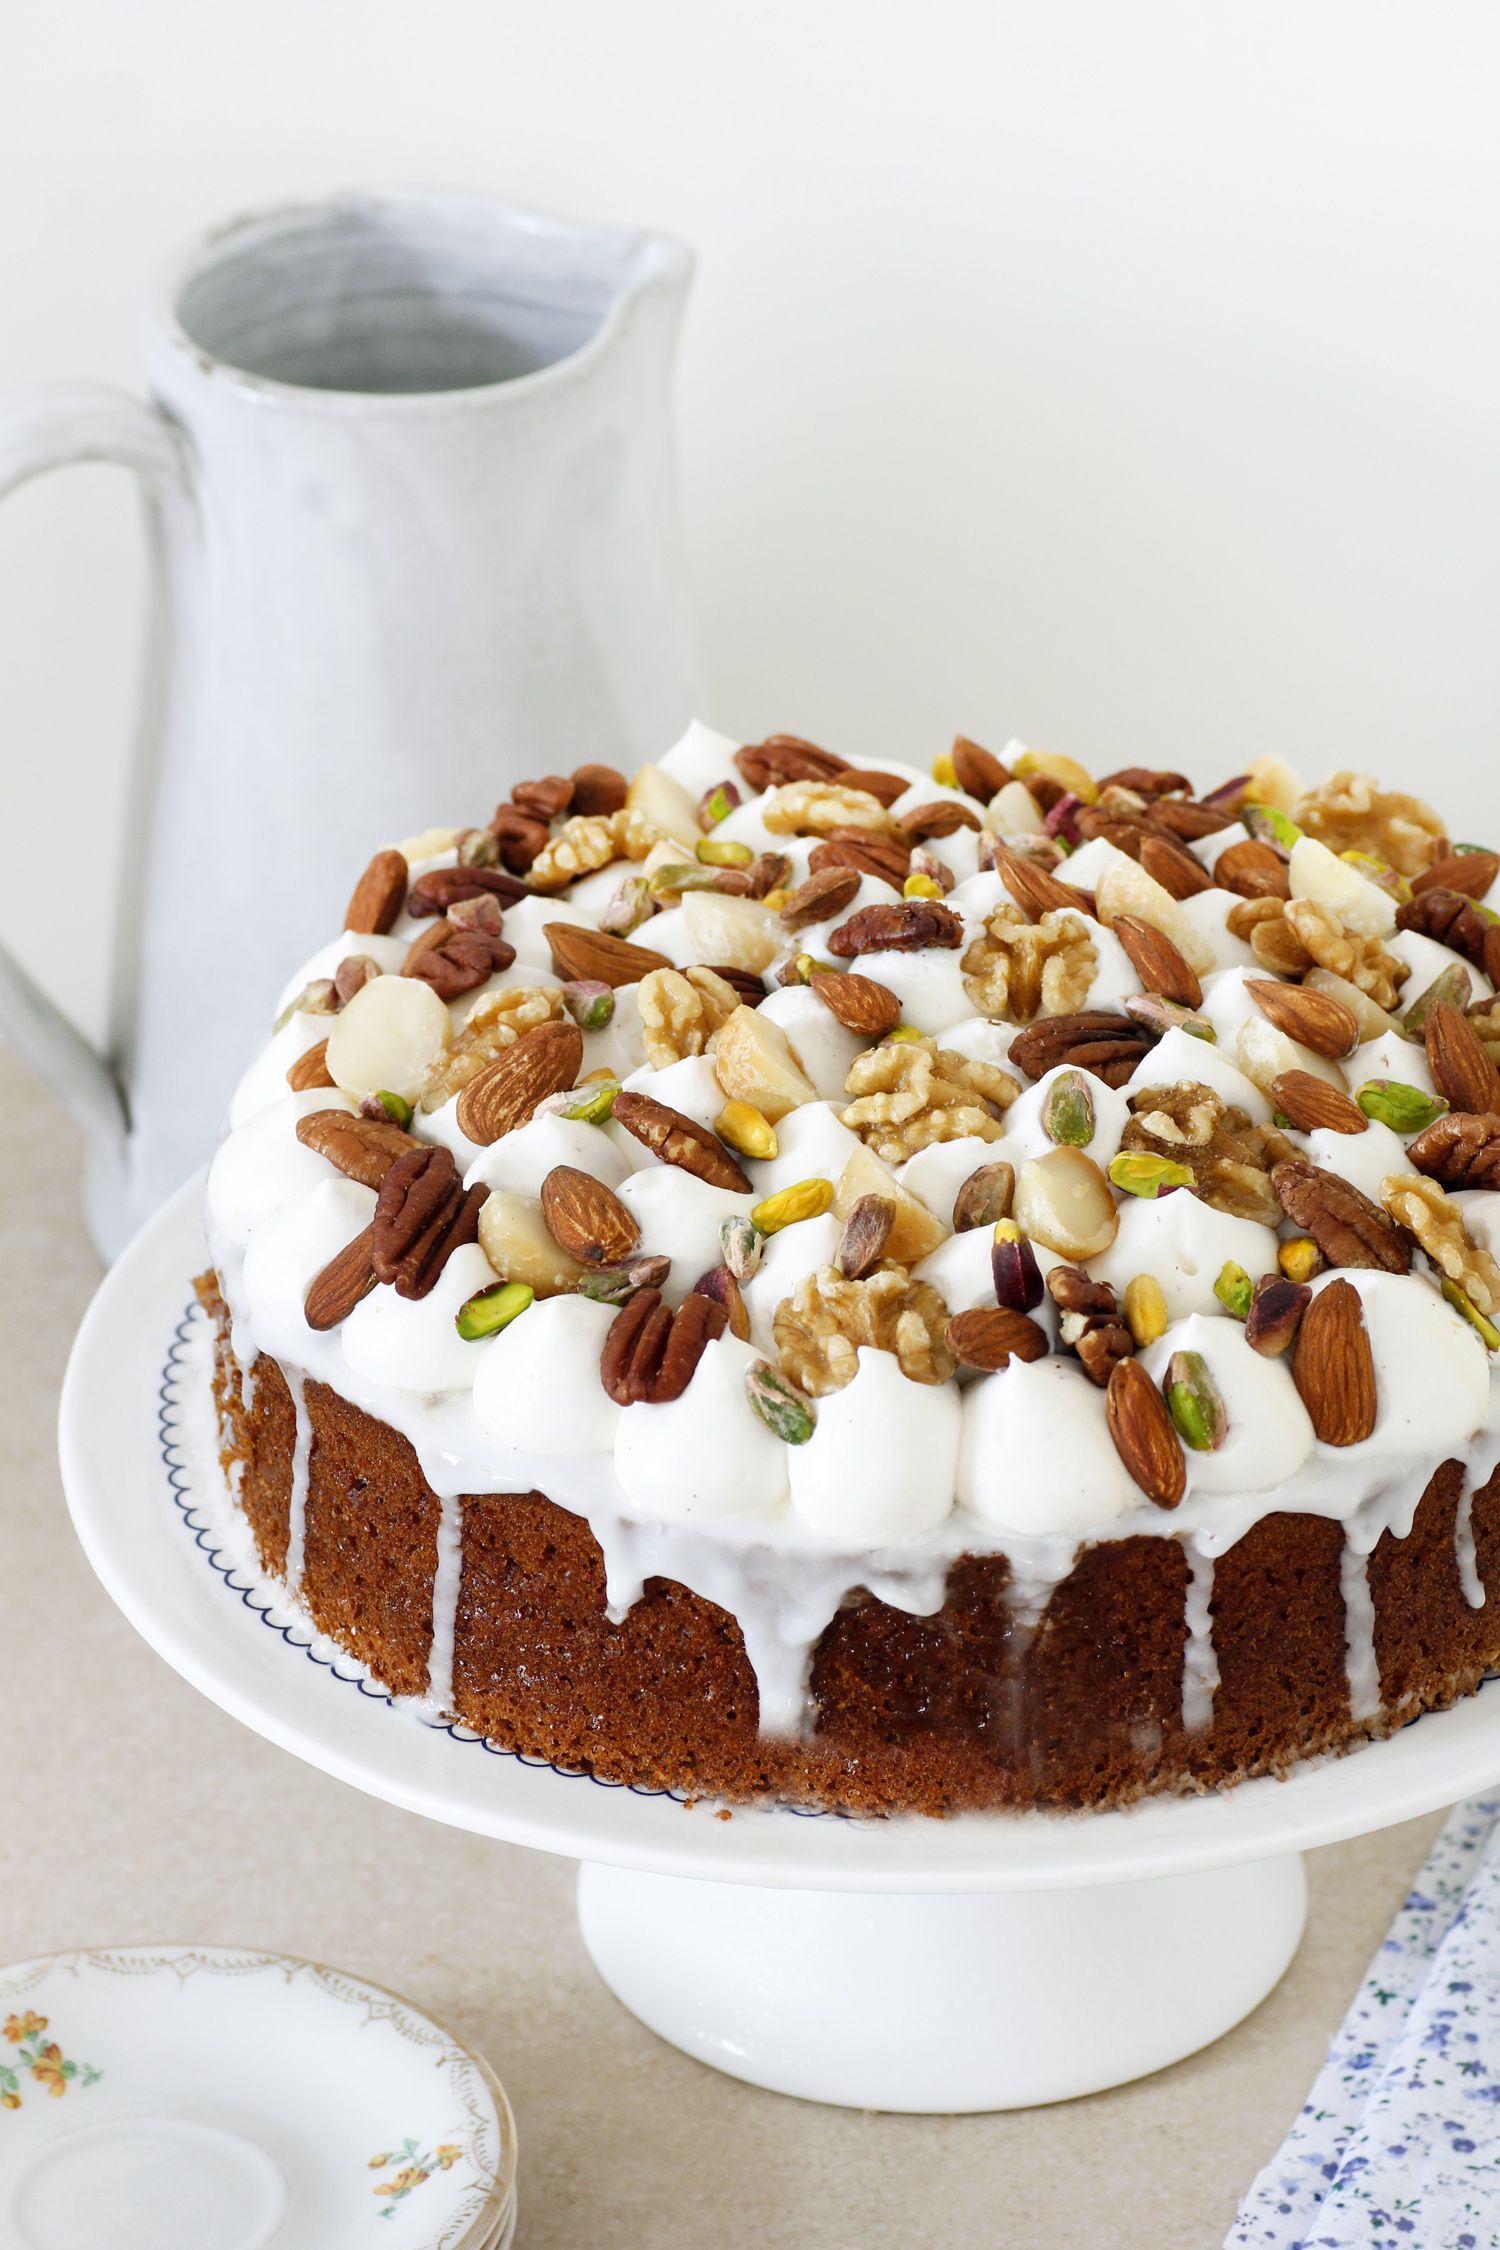 Earl Gray Honey Cake with Nuts